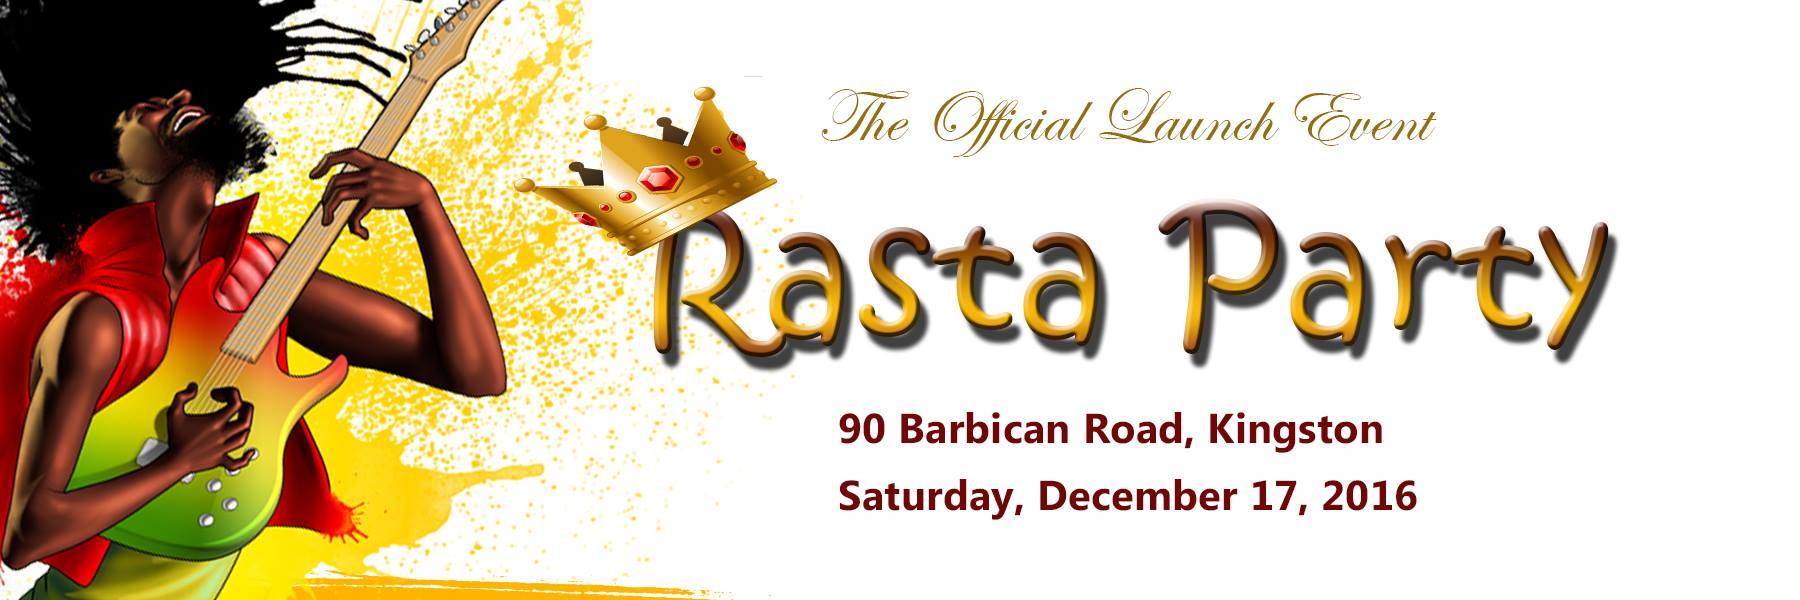 Rasta Party, The Official Launch